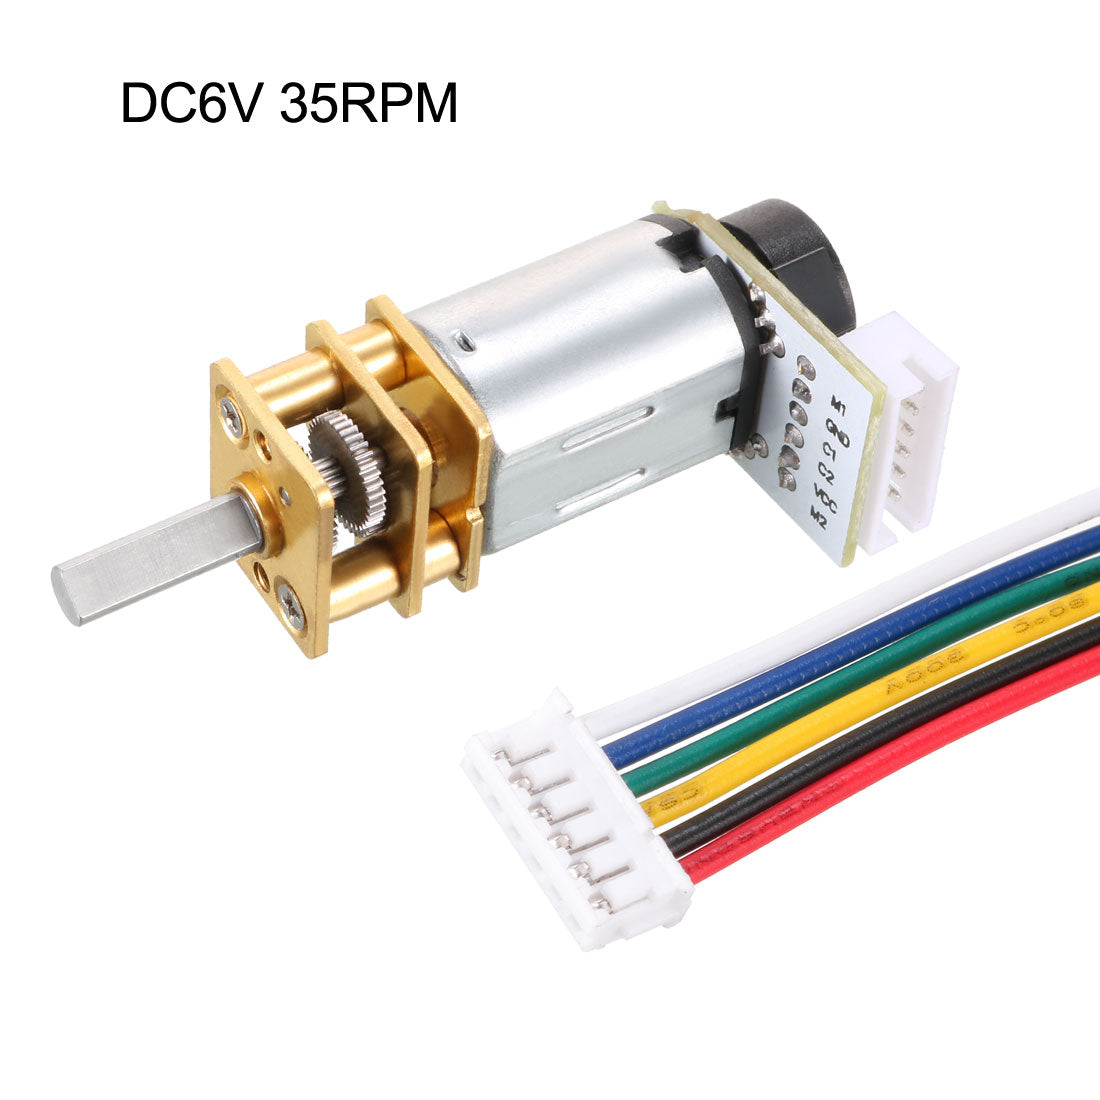 uxcell Uxcell DC 6V 35RPM Gear Motor Encoder Speed Velocity Measurement for Mini Car DIY